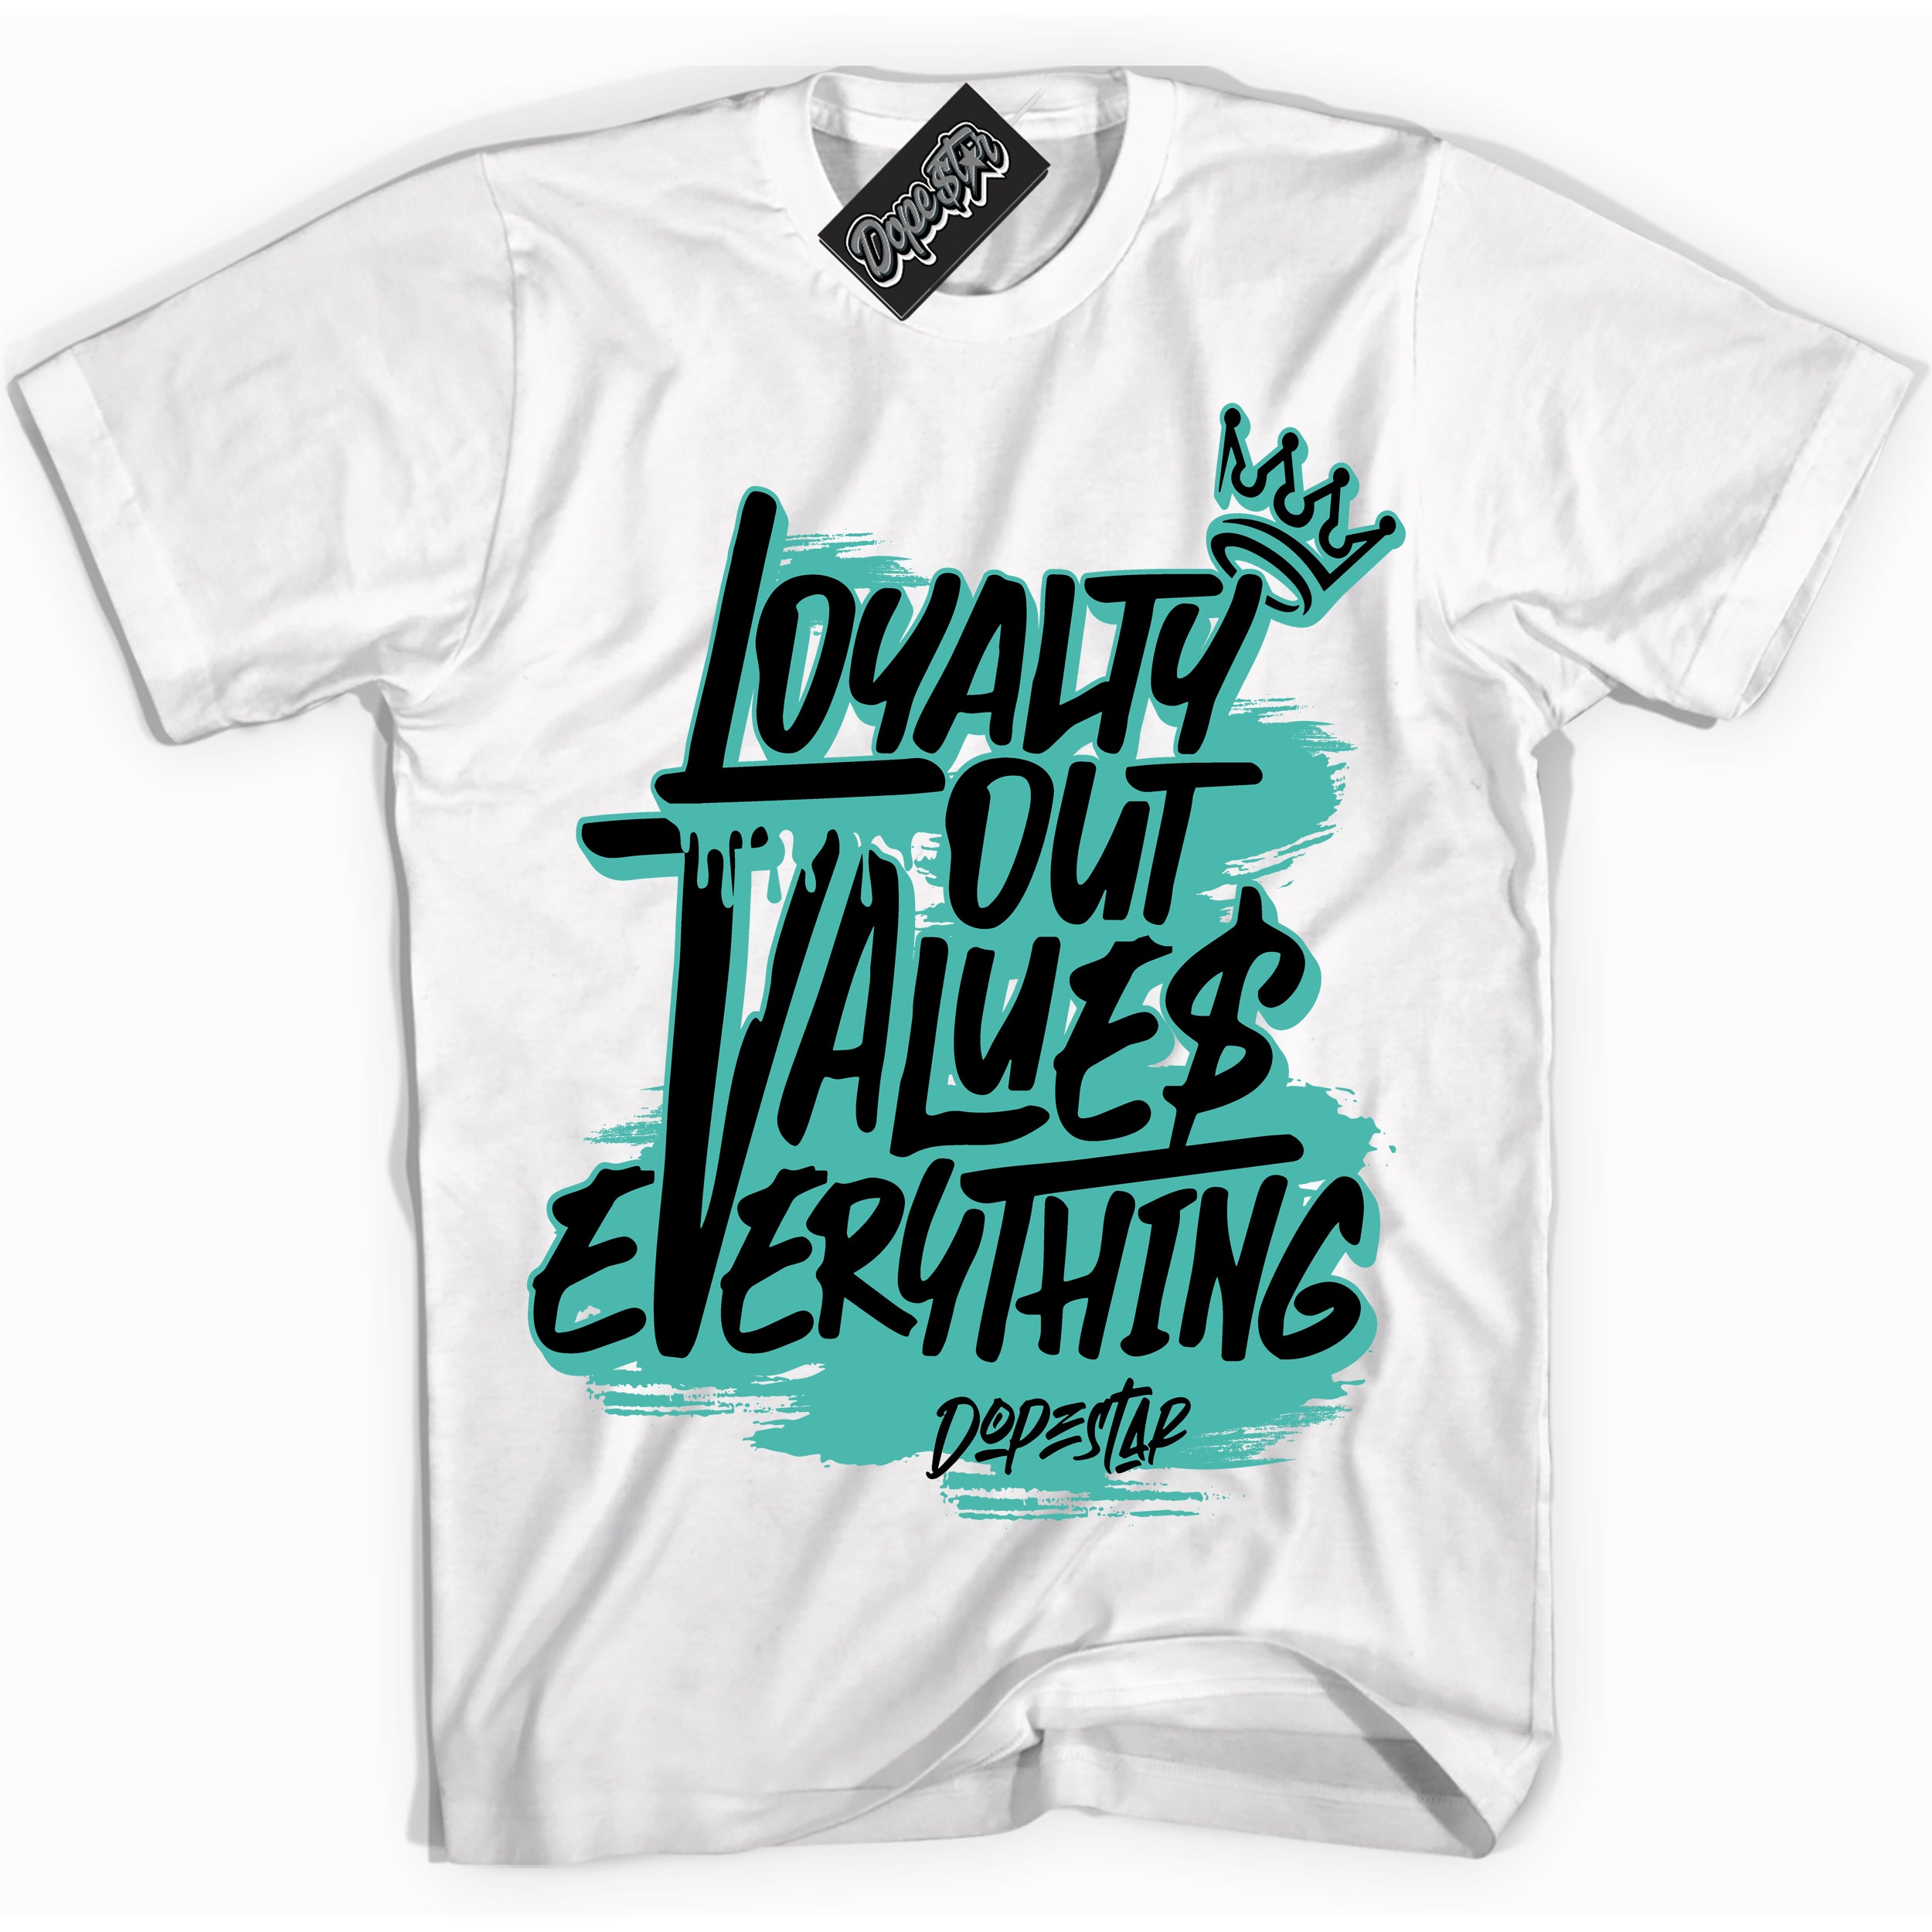 Cool White Shirt with “ Loyalty Out Values Everything” design that perfectly matches Tiffany & Co. 1837 1s Sneakers.